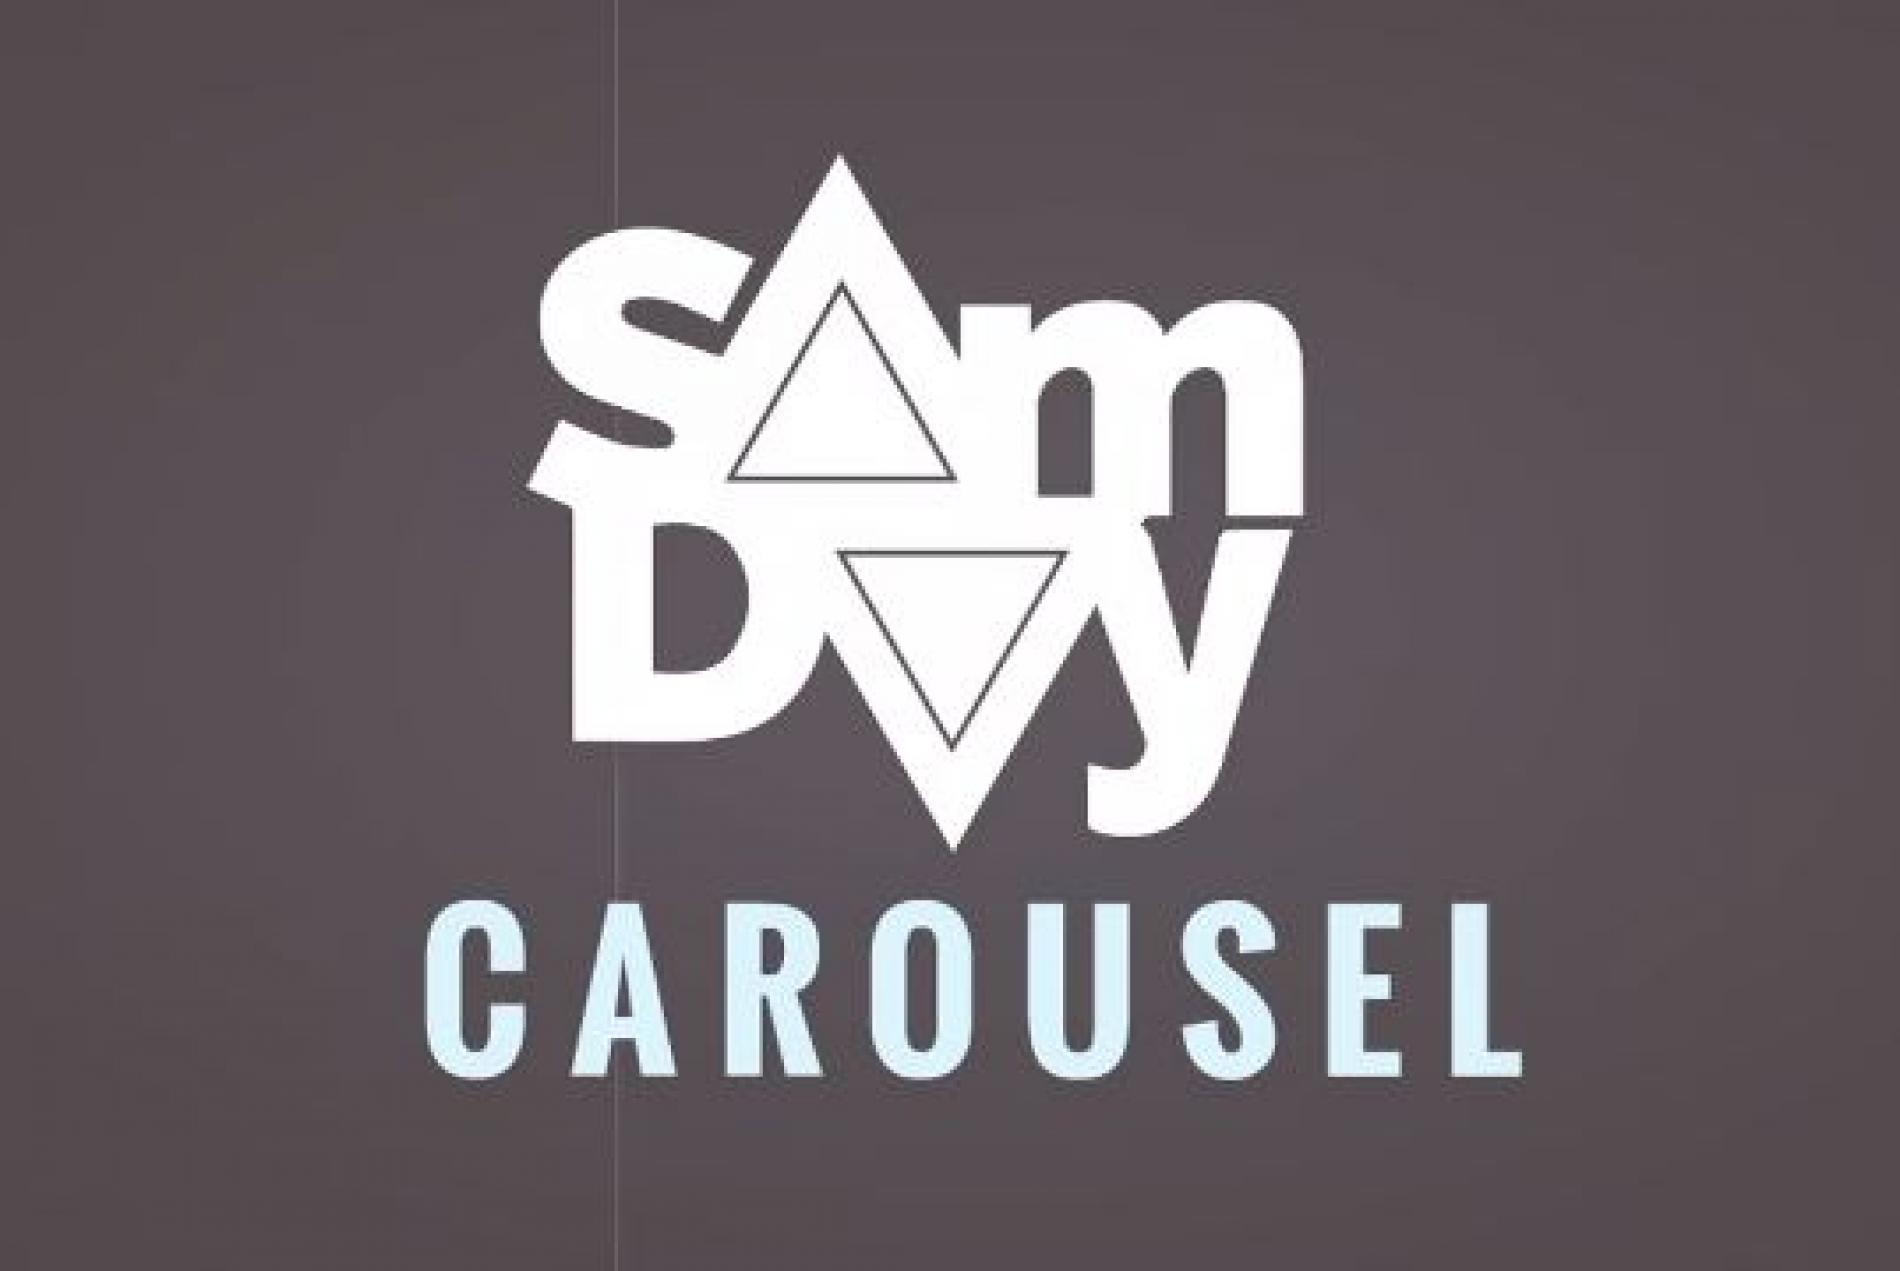 Sam Day – Carousel (Official Lyric Video)